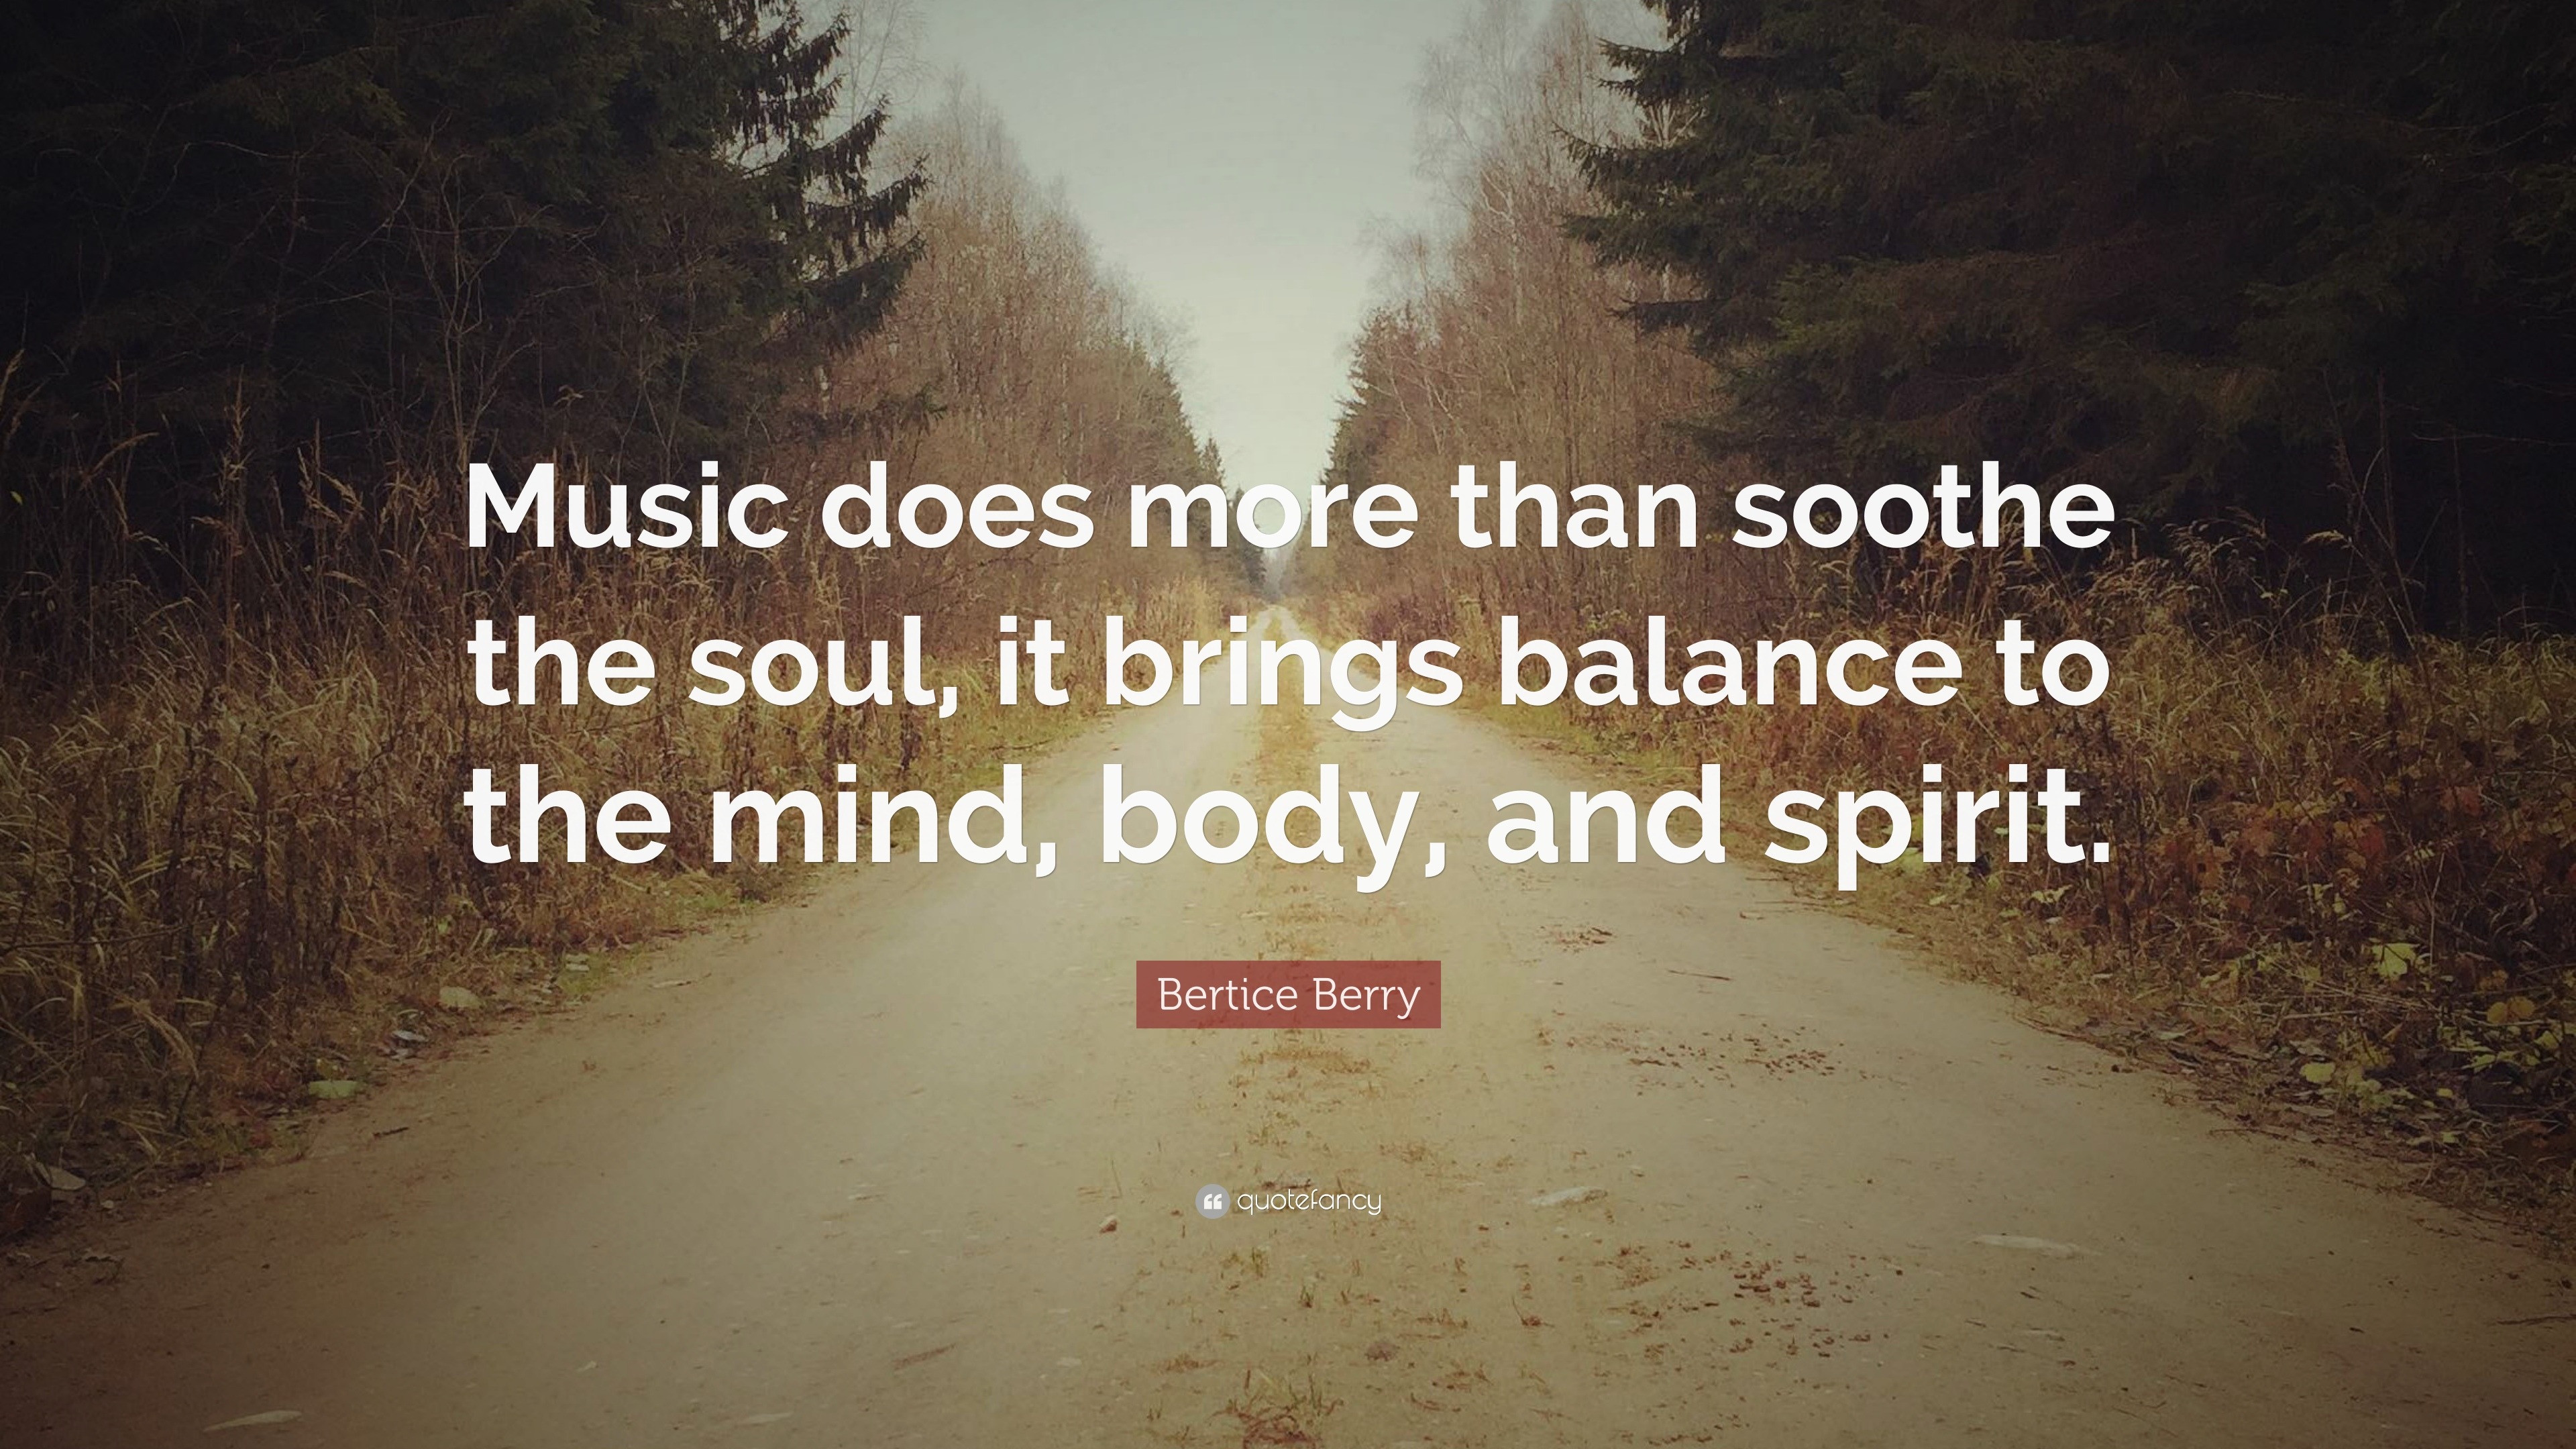 Bertice Berry Quote: “Music does more than soothe the soul, it brings